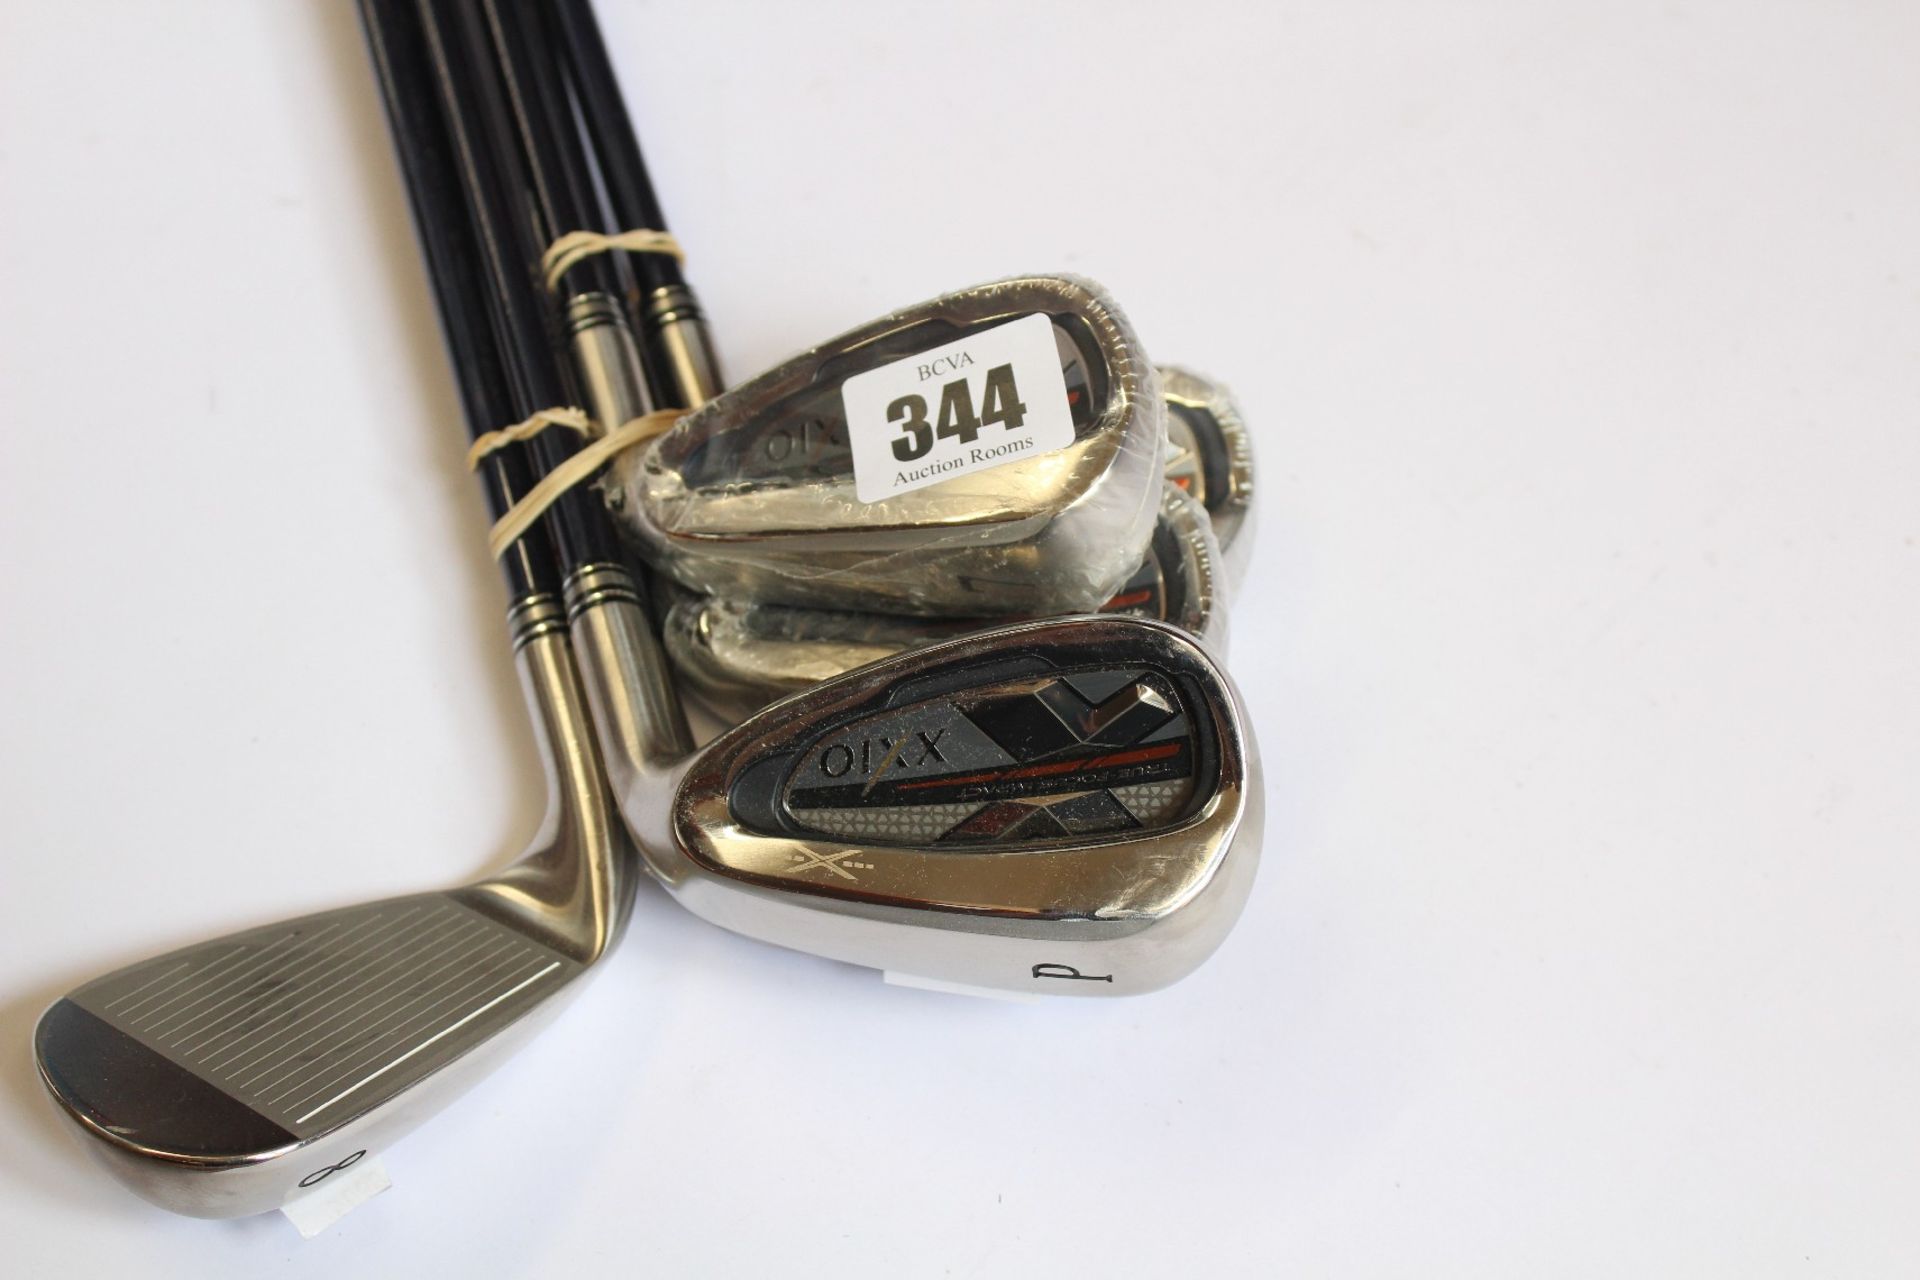 A set of XXIO True-Focus Impact irons 5,6,7,8,9 and P (Three clubs have some minor damage, other